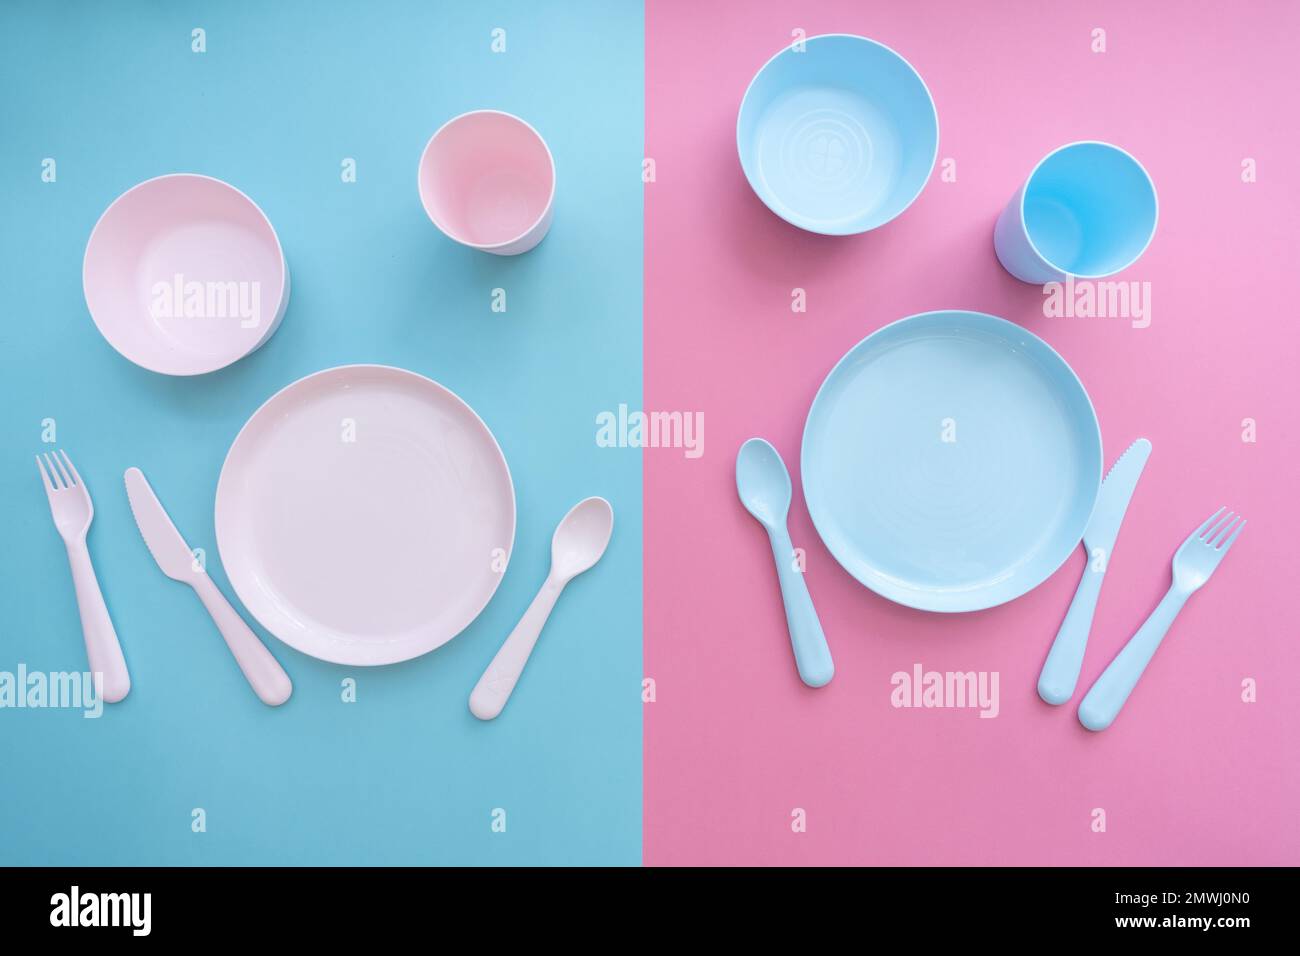 https://c8.alamy.com/comp/2MWJ0N0/flat-lay-baby-feeding-set-sippy-cup-plate-bowl-cutlery-on-pastel-pink-and-blue-background-toddler-self-feeding-training-baby-weaning-concept-2MWJ0N0.jpg